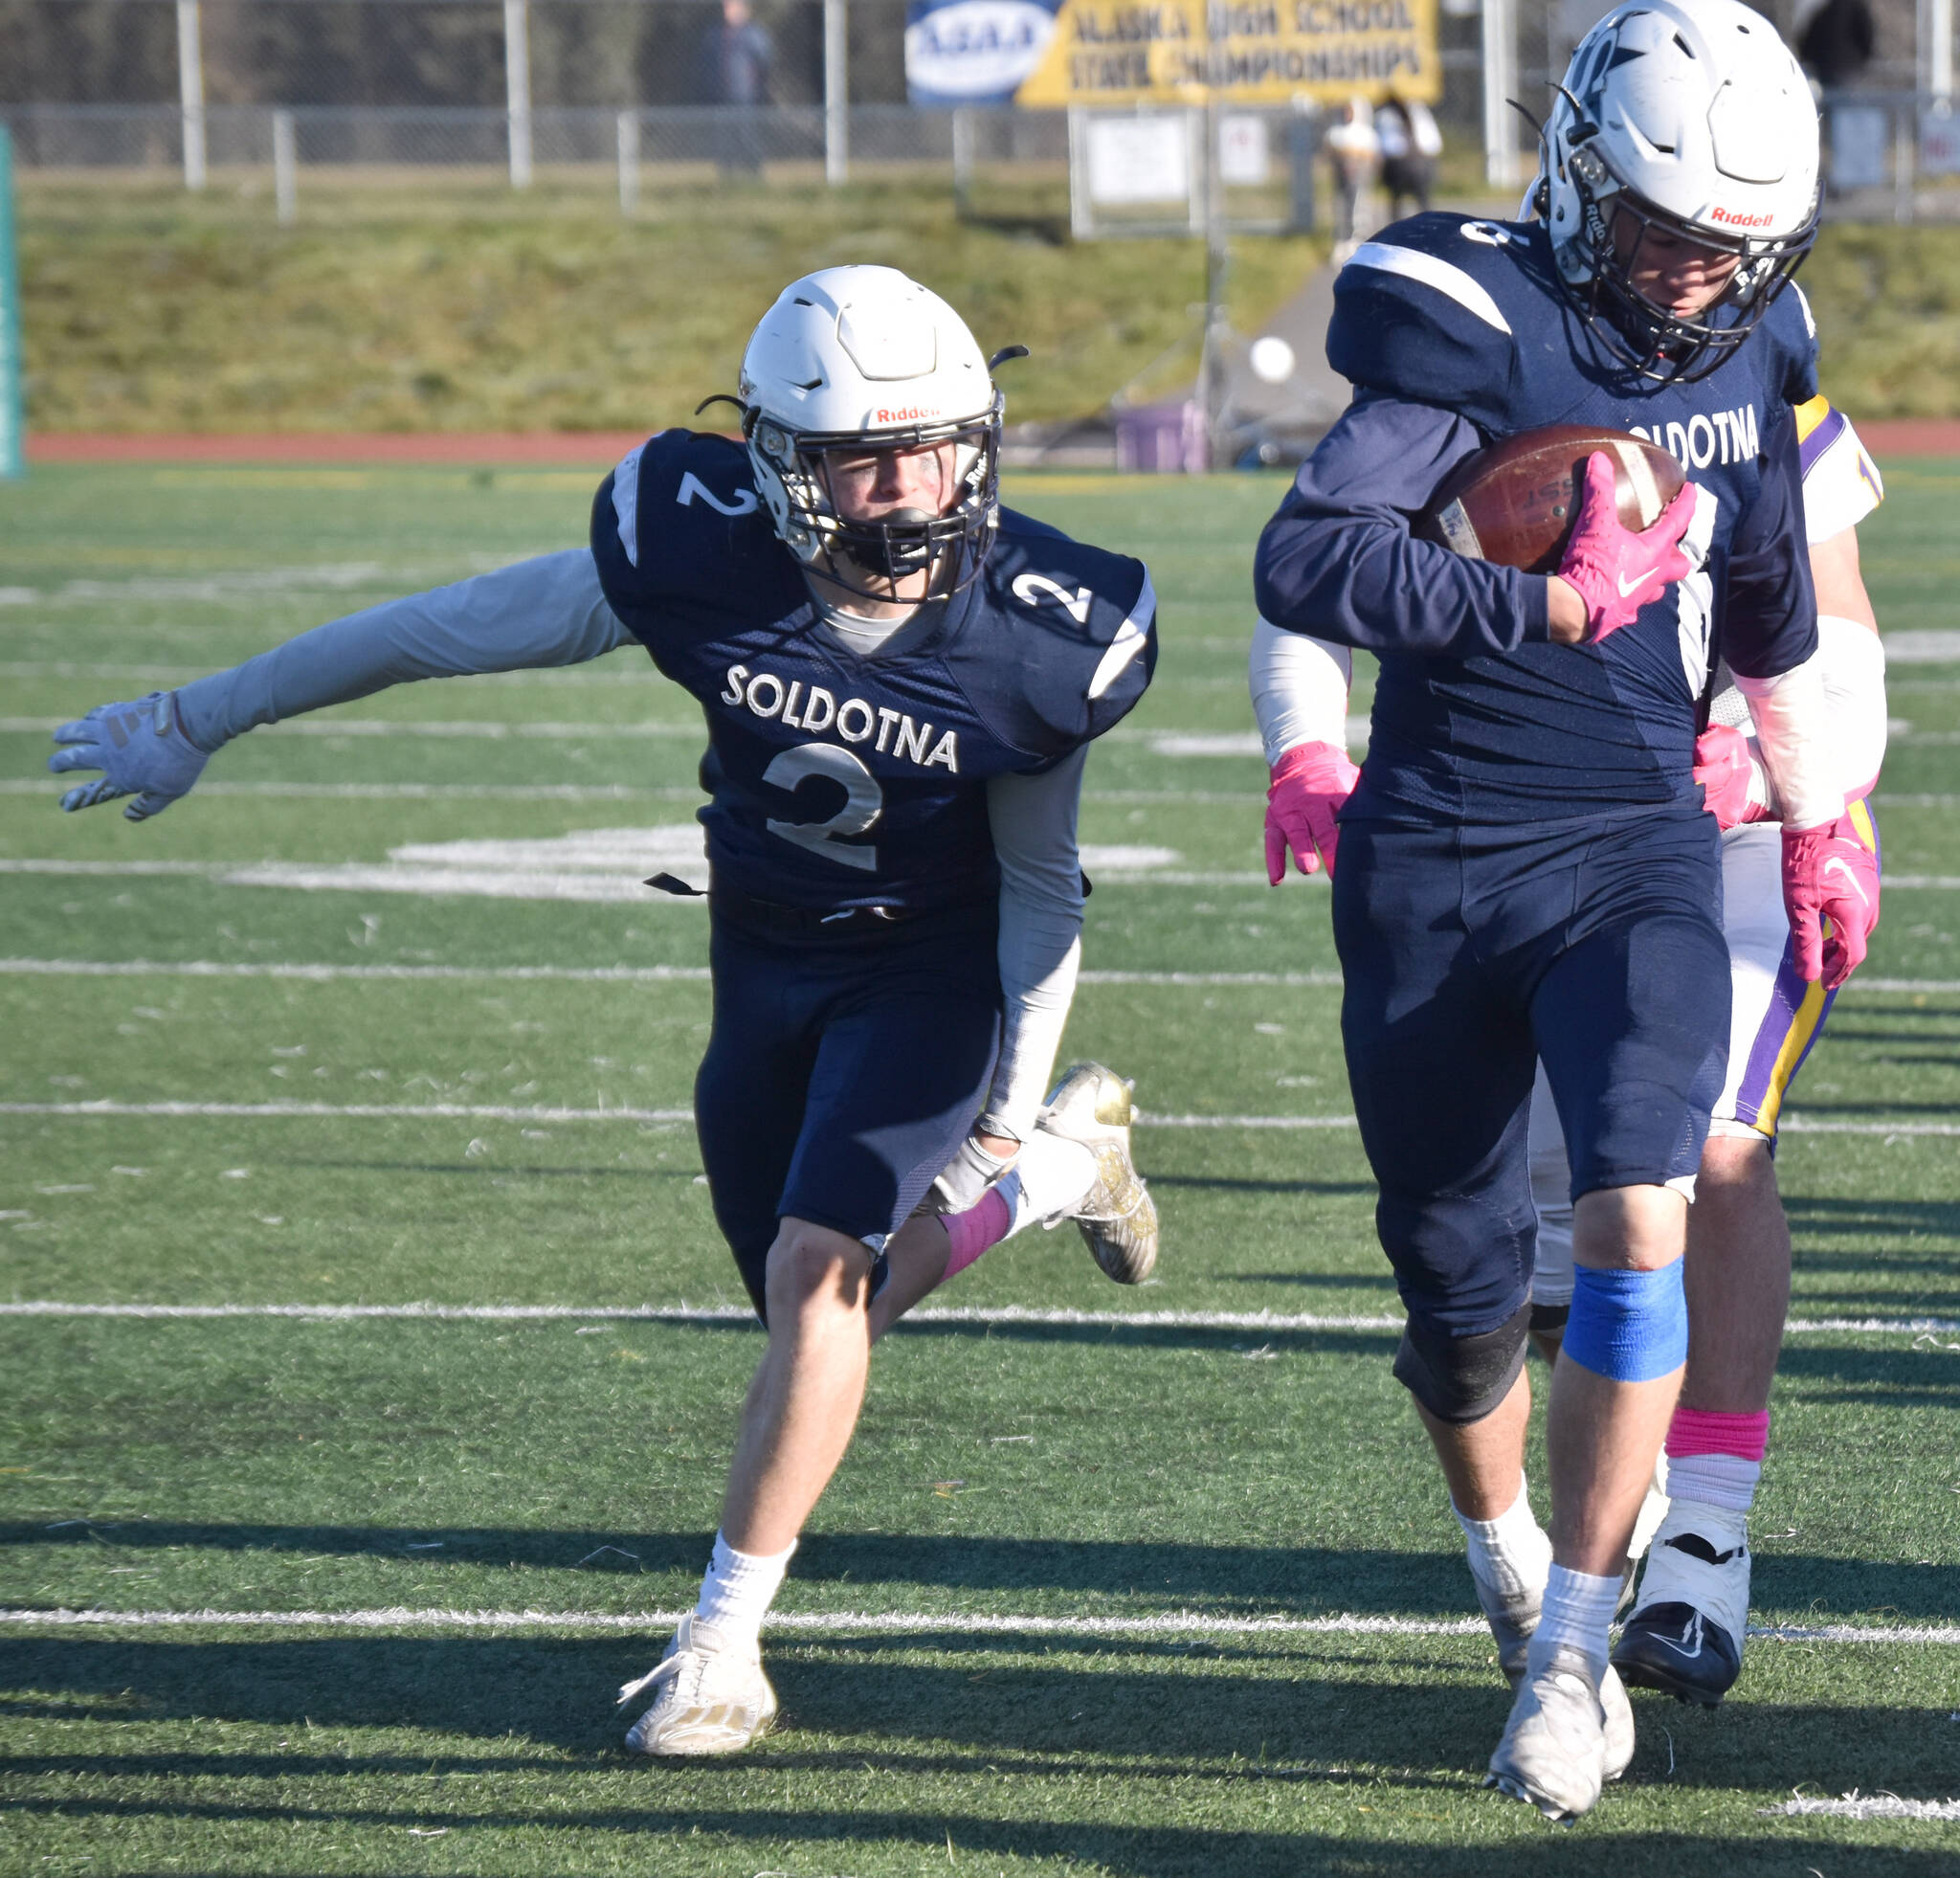 Soldotna’s Trevor Michael returns an interception Saturday, Oct. 21, 2023, in the Division II championship game at Service High School in Anchorage, Alaska. (Photo by Jeff Helminiak/Peninsula Clarion)